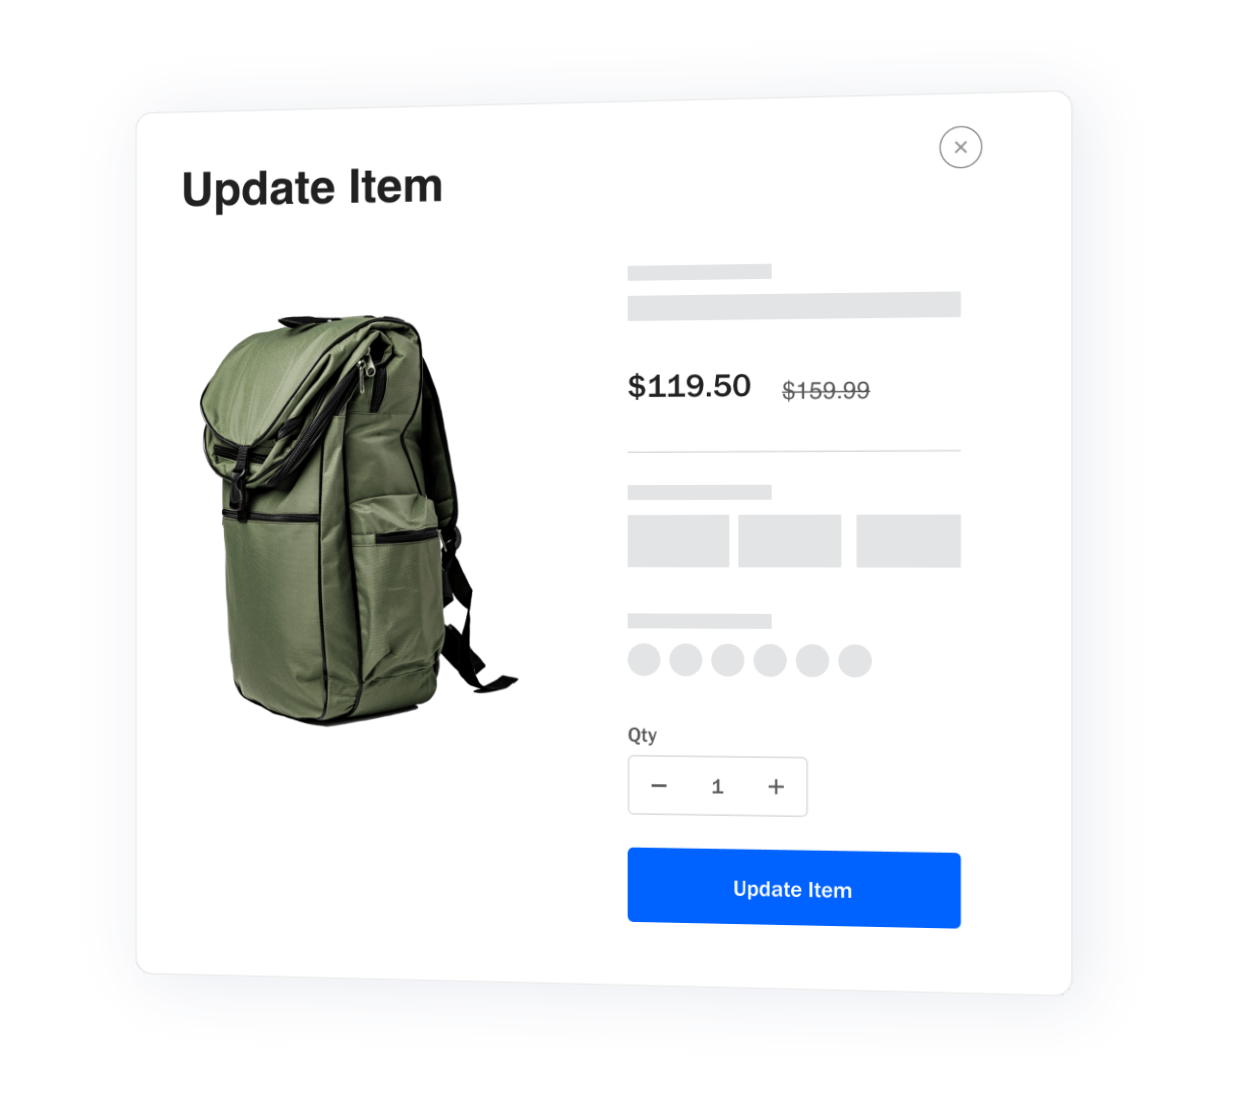 Screenshot of a backpack product page with price, quantity, and button for Update Item.